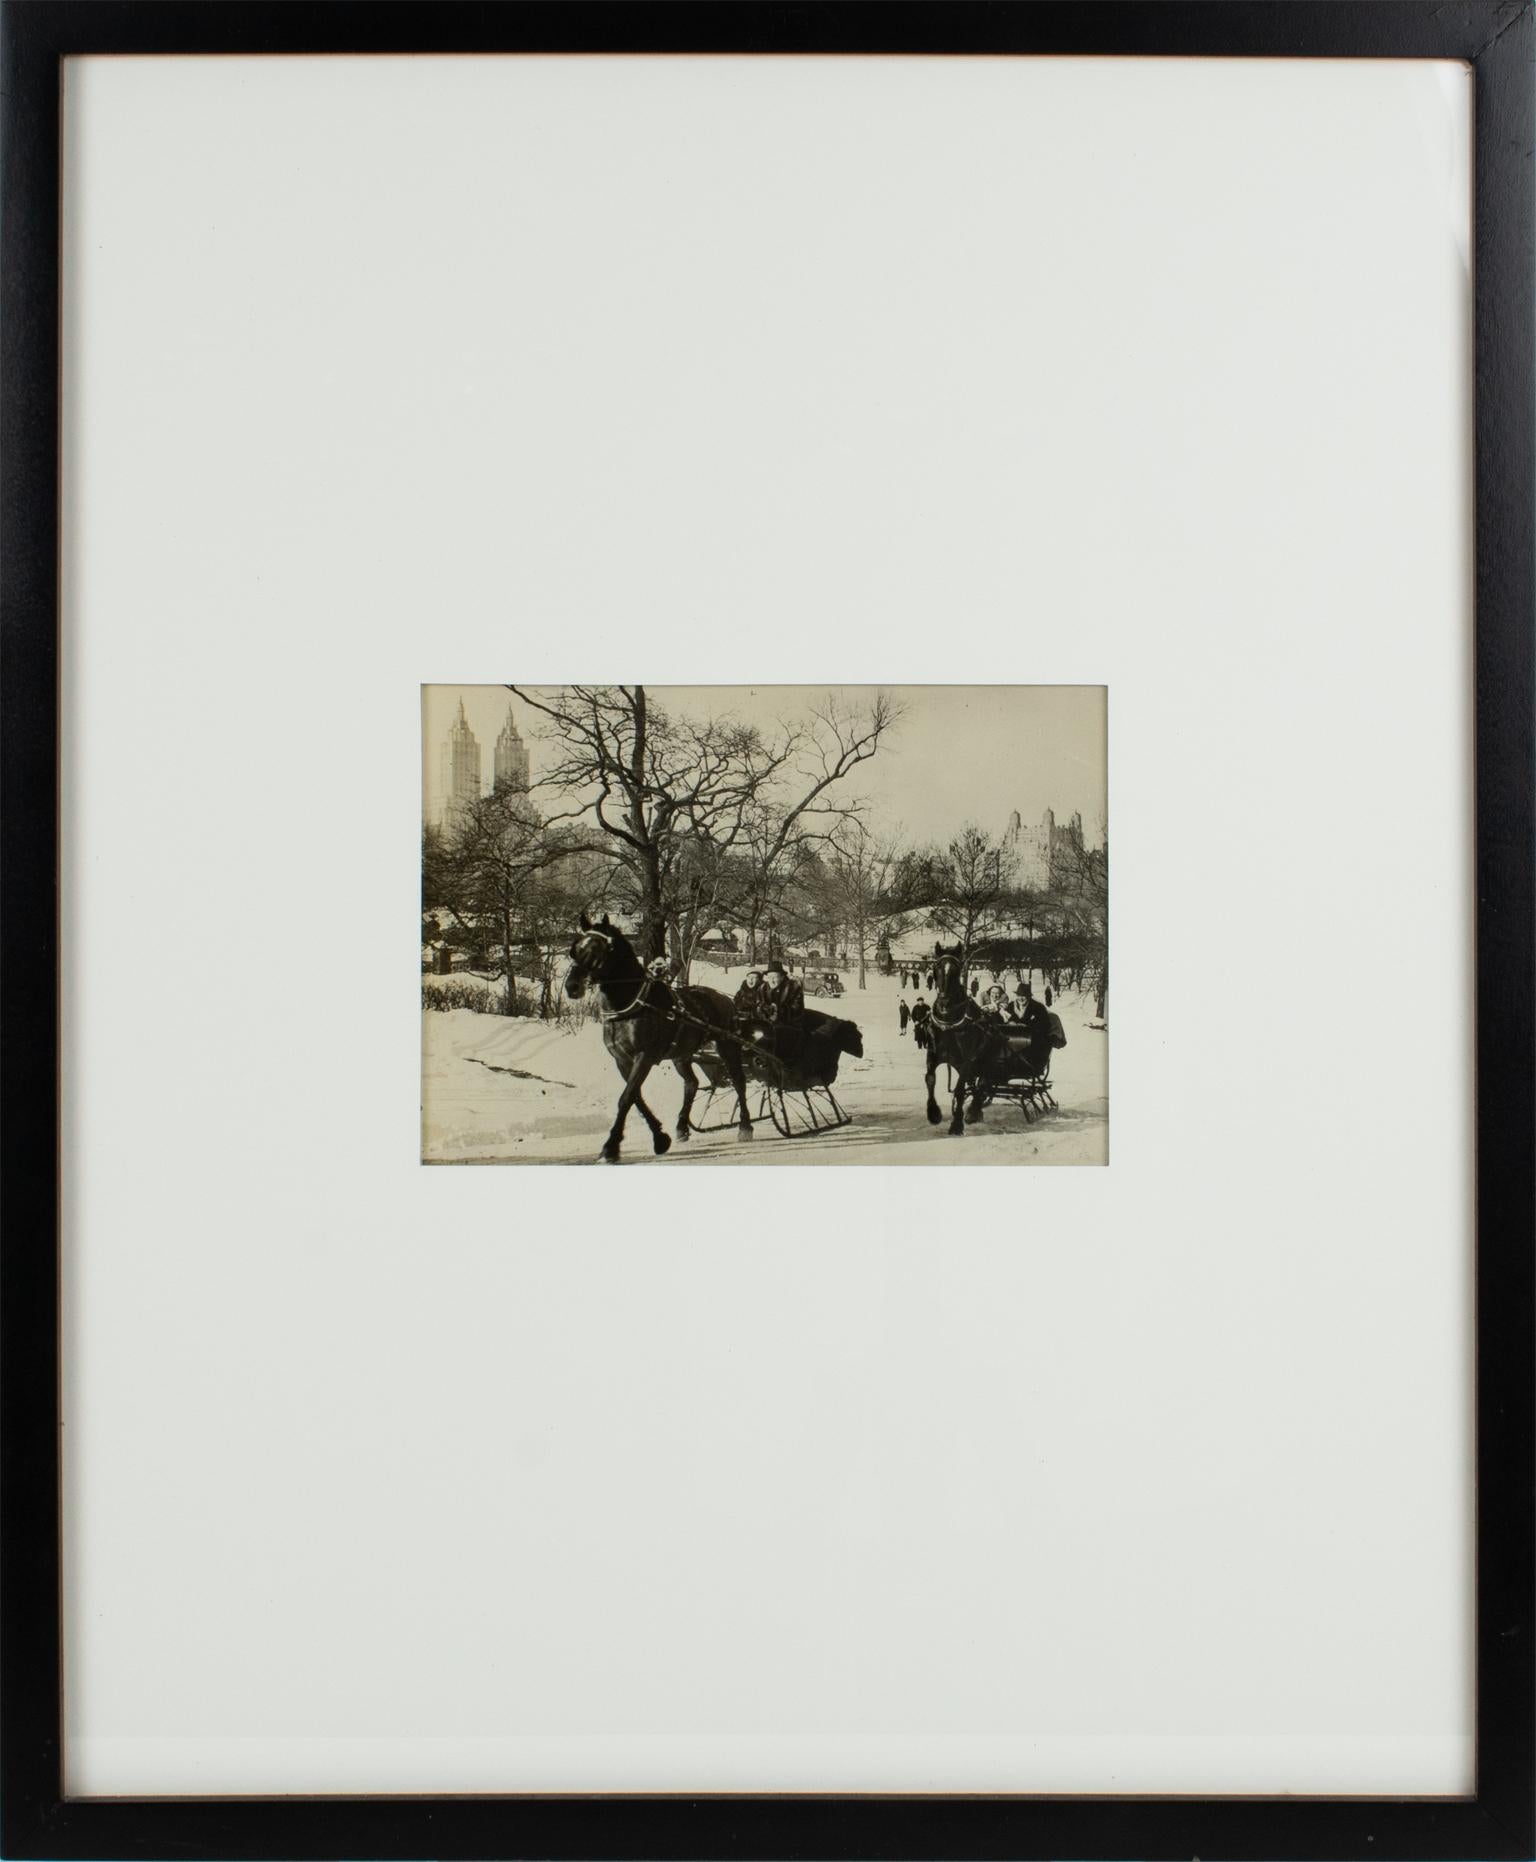 An original silver gelatin black and white photograph by Press Agency New York Times office in Paris (Wide World Photos.) Sled race in Central Park, New York, 1934.
Features:
Original silver gelatin print photography framed.
Press Agency New York